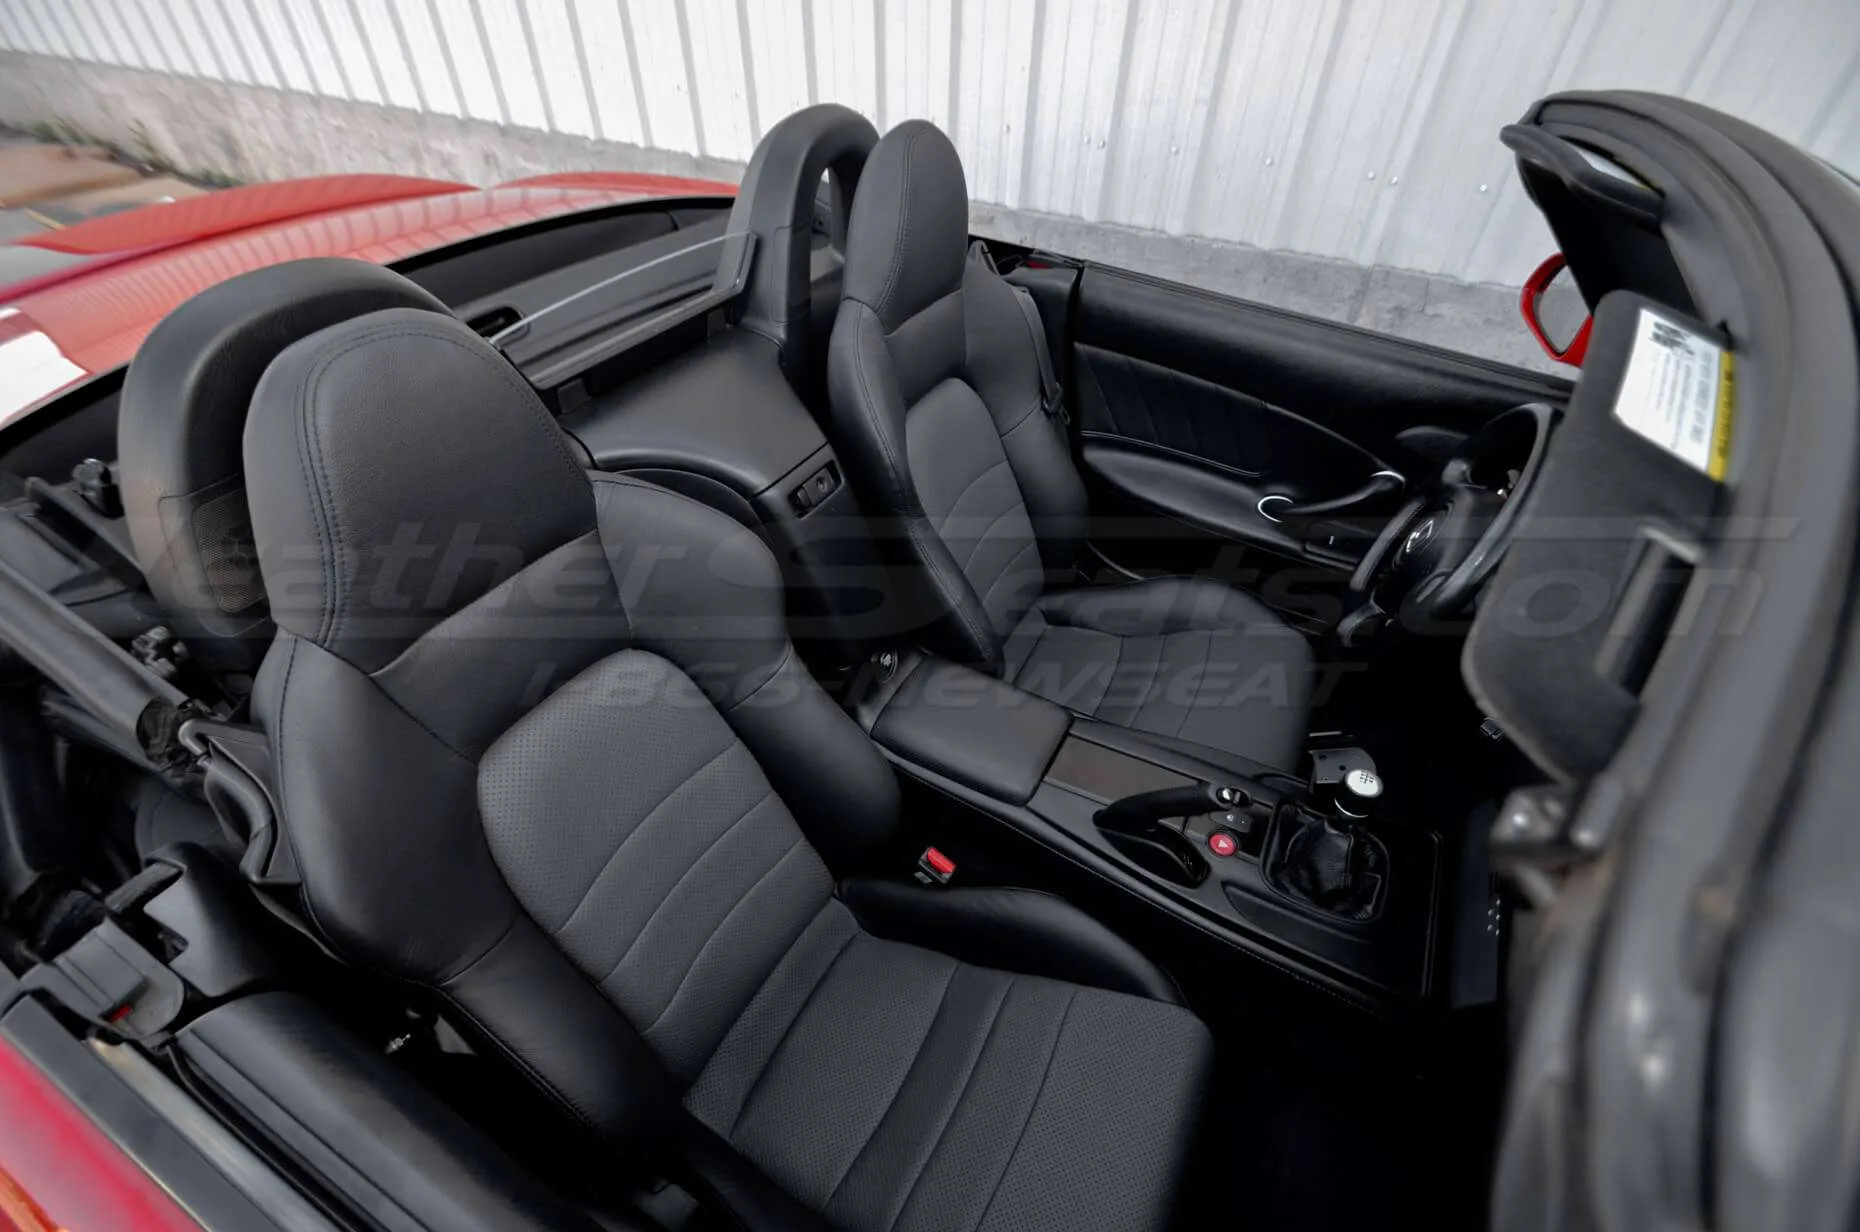 Installed Honda S2000 seats - Black and Graphite - Top down from alternative angle